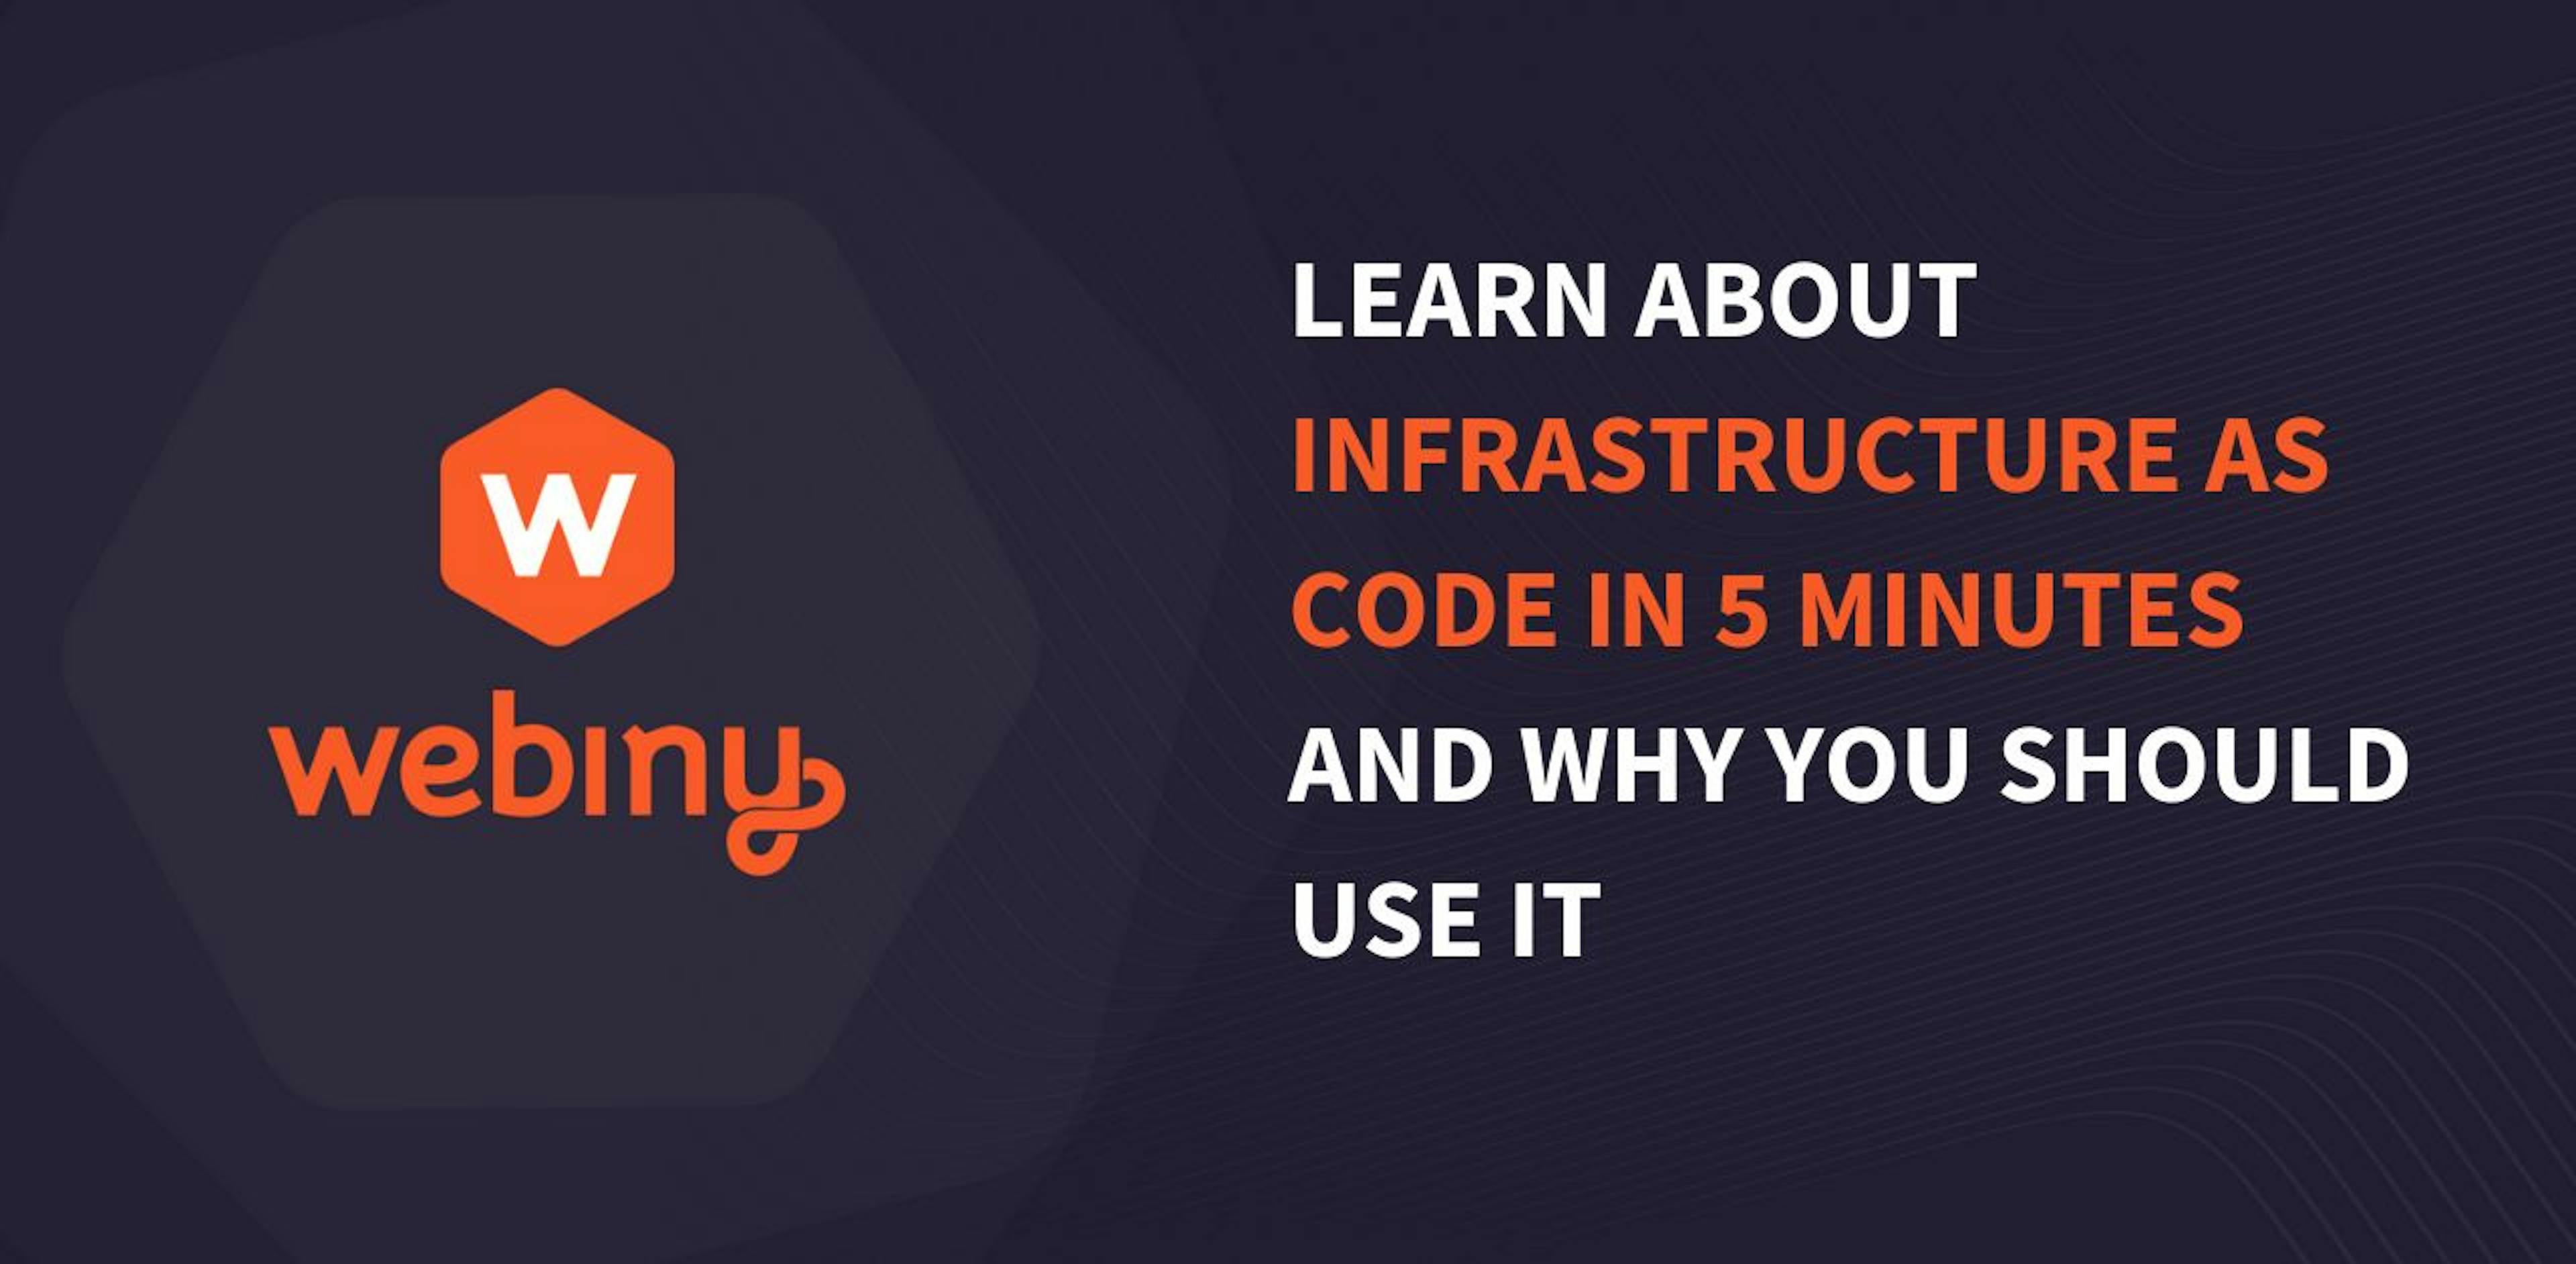 /learn-about-infrastructure-as-code-in-5-minutes-and-why-you-should-use-it feature image